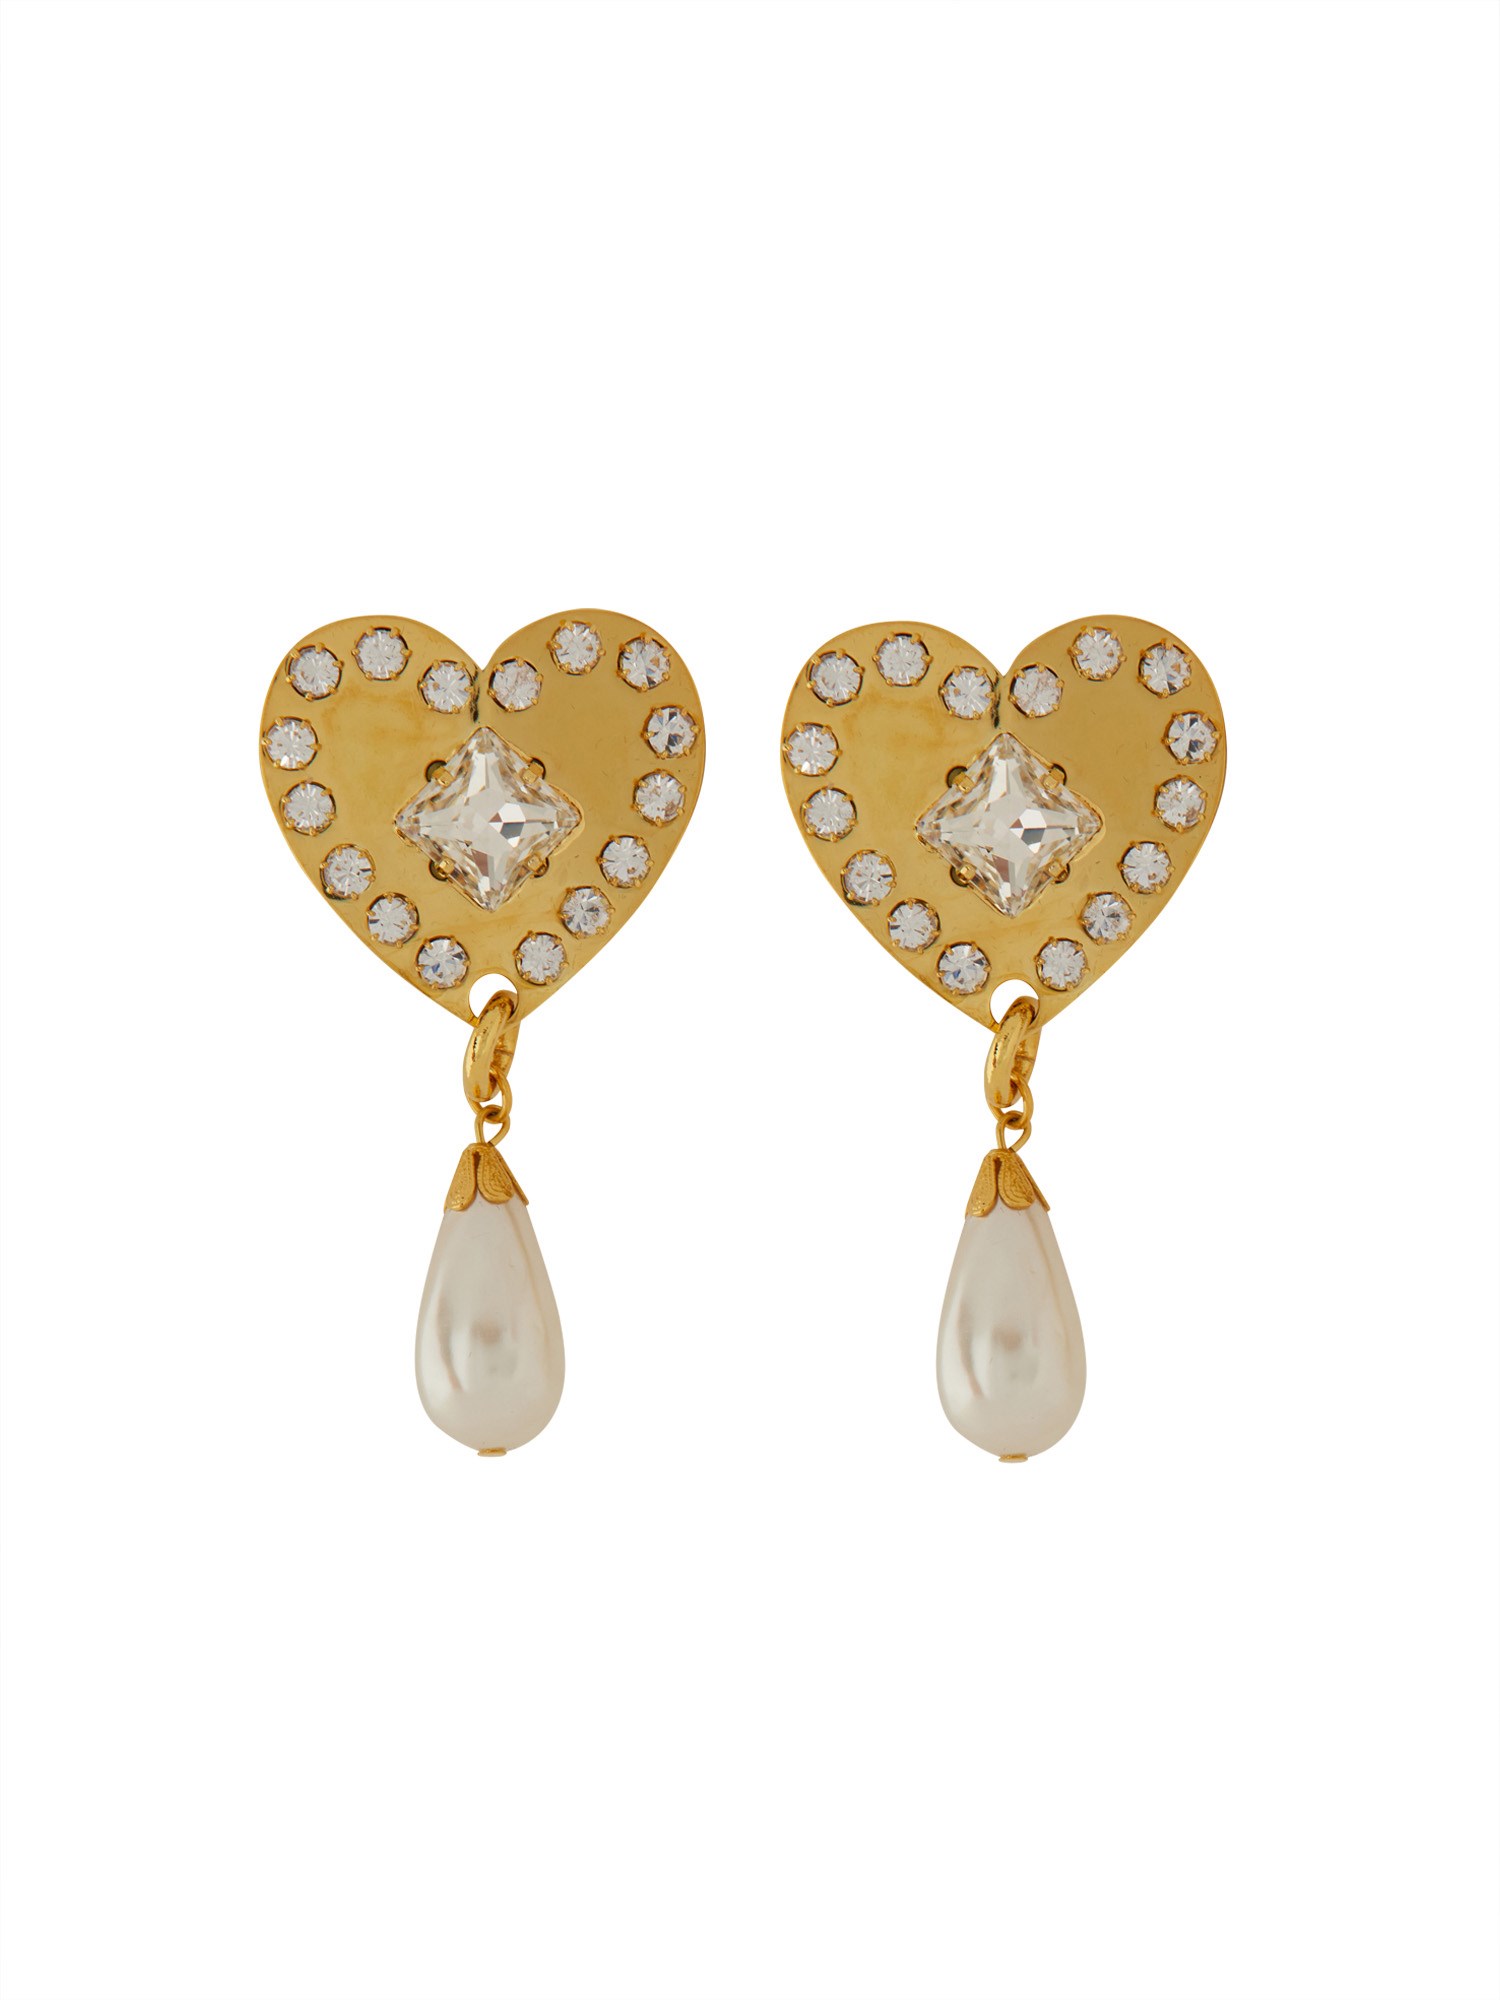 Alessandra Rich alessandra rich metal heart earrings with crystals